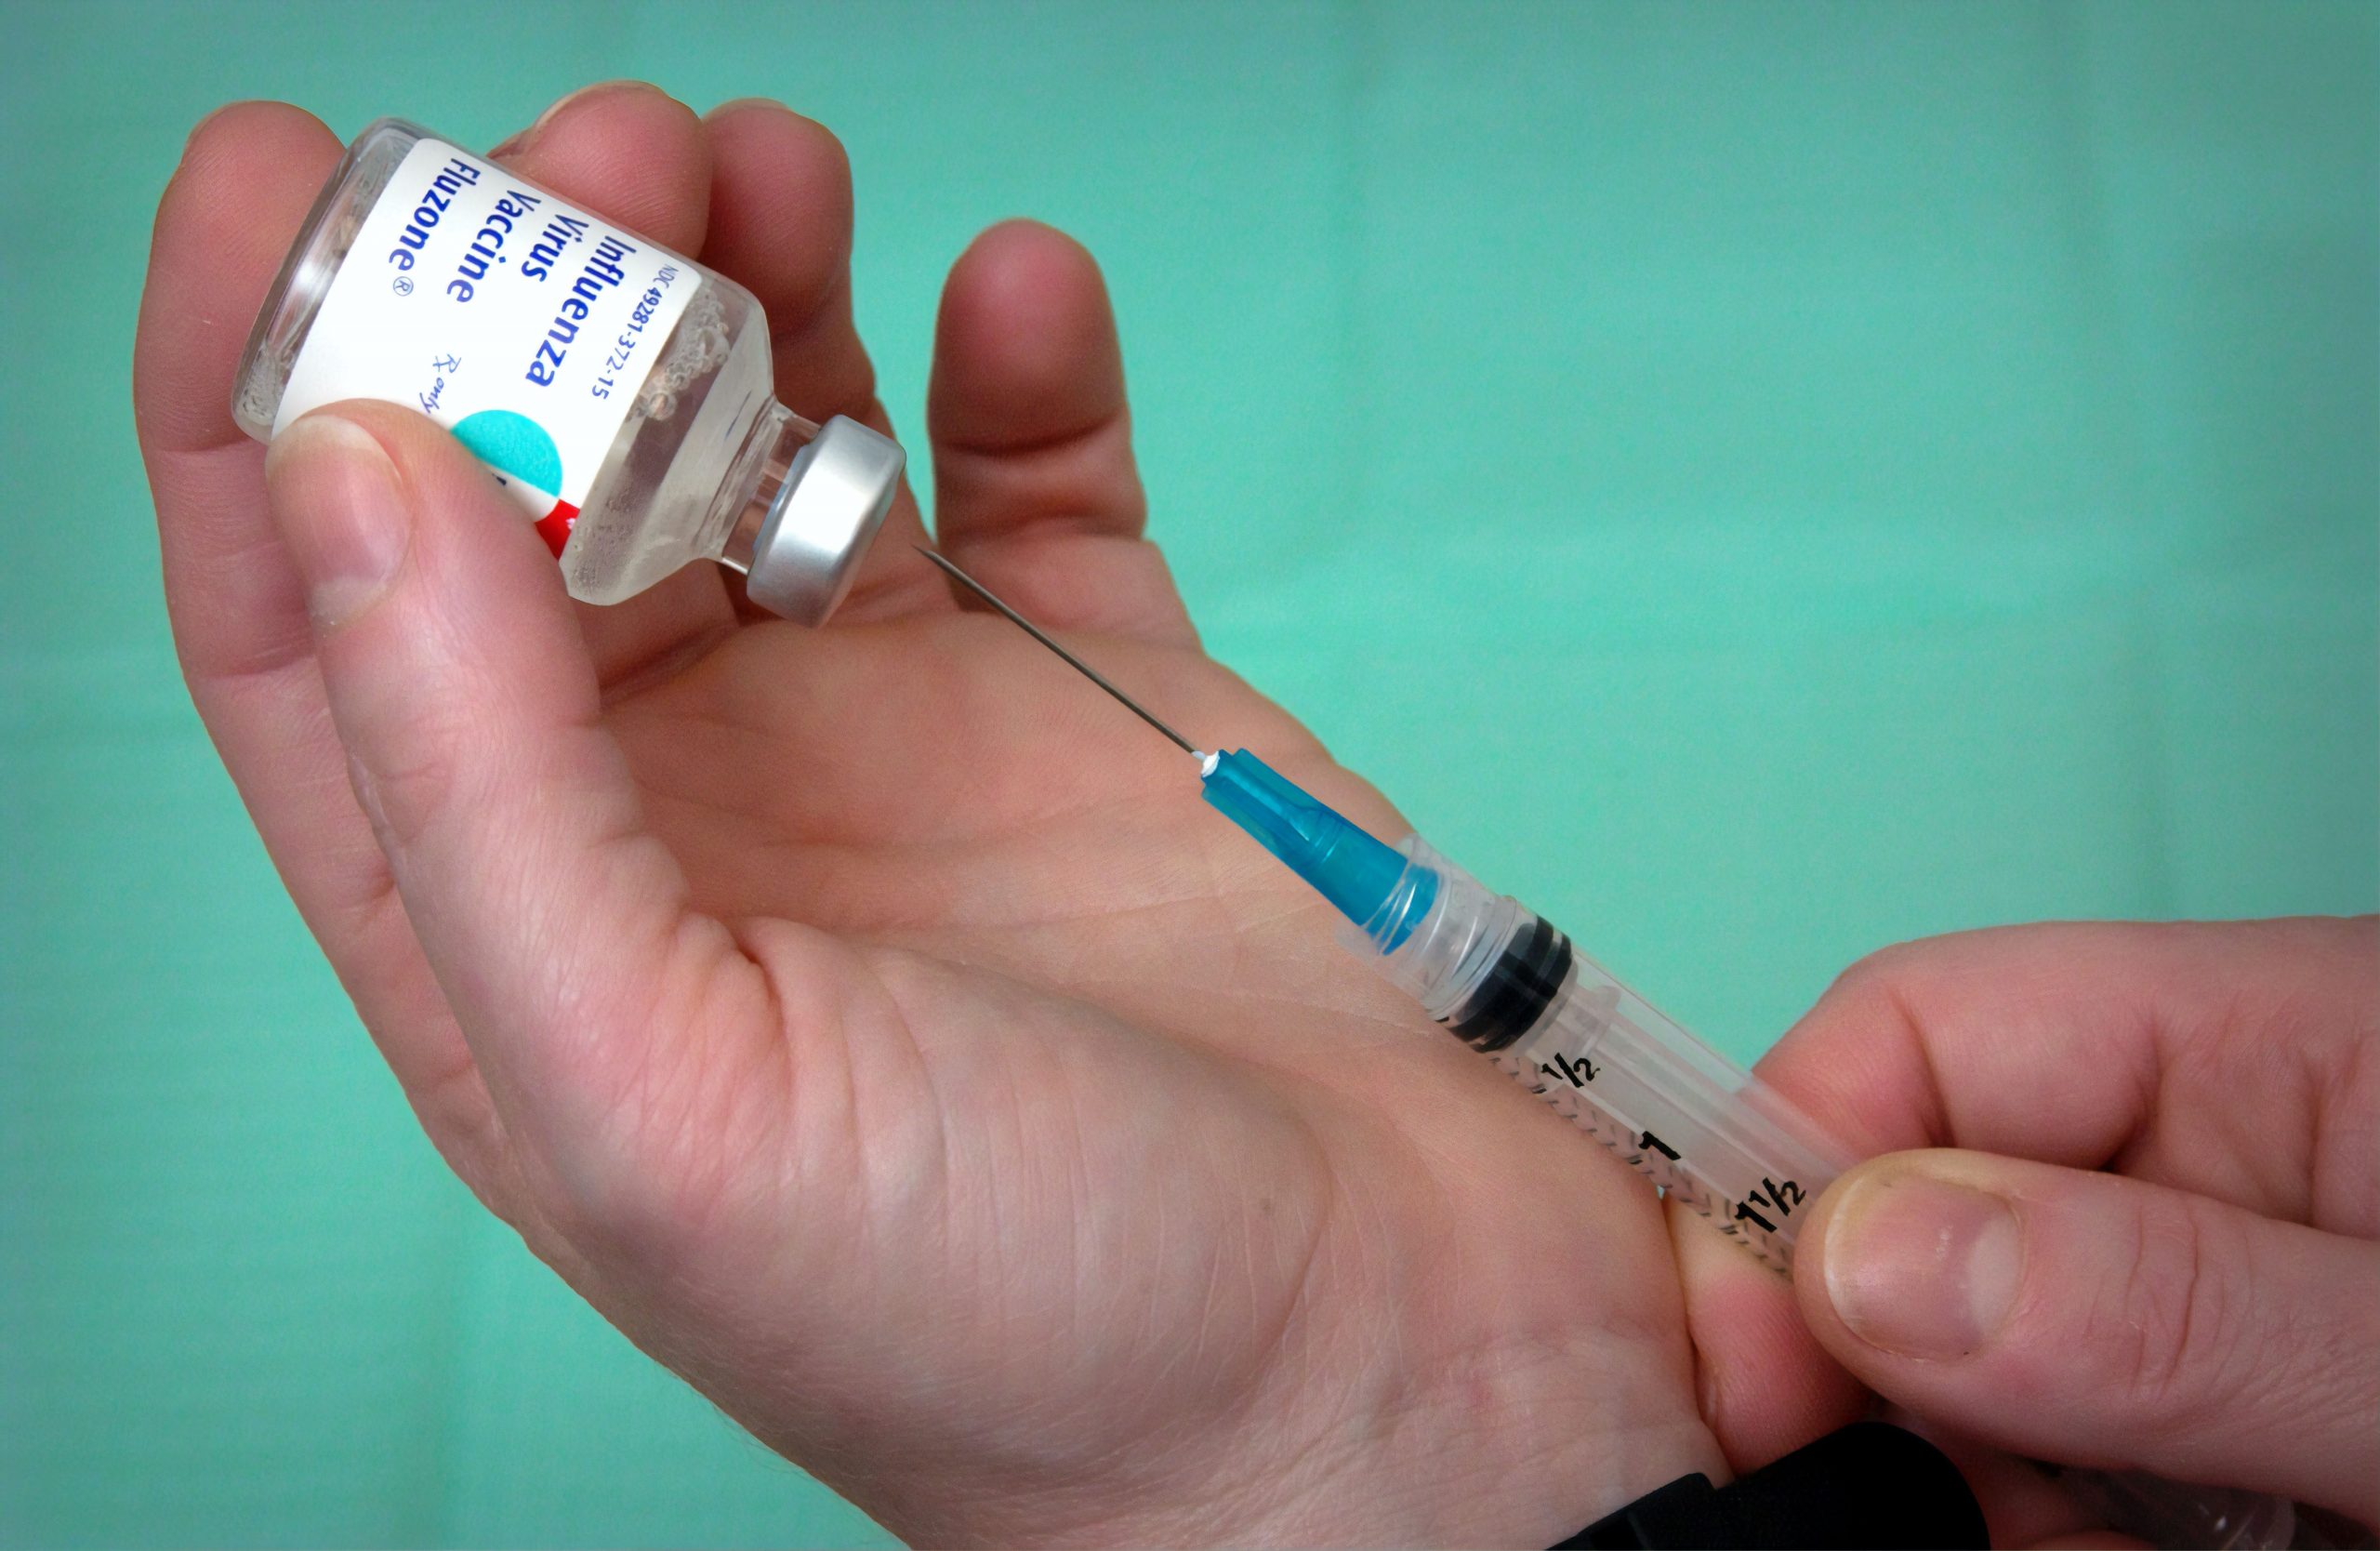 Israel announces 3rd booster COVID-19 vaccine shot for citizens over 60